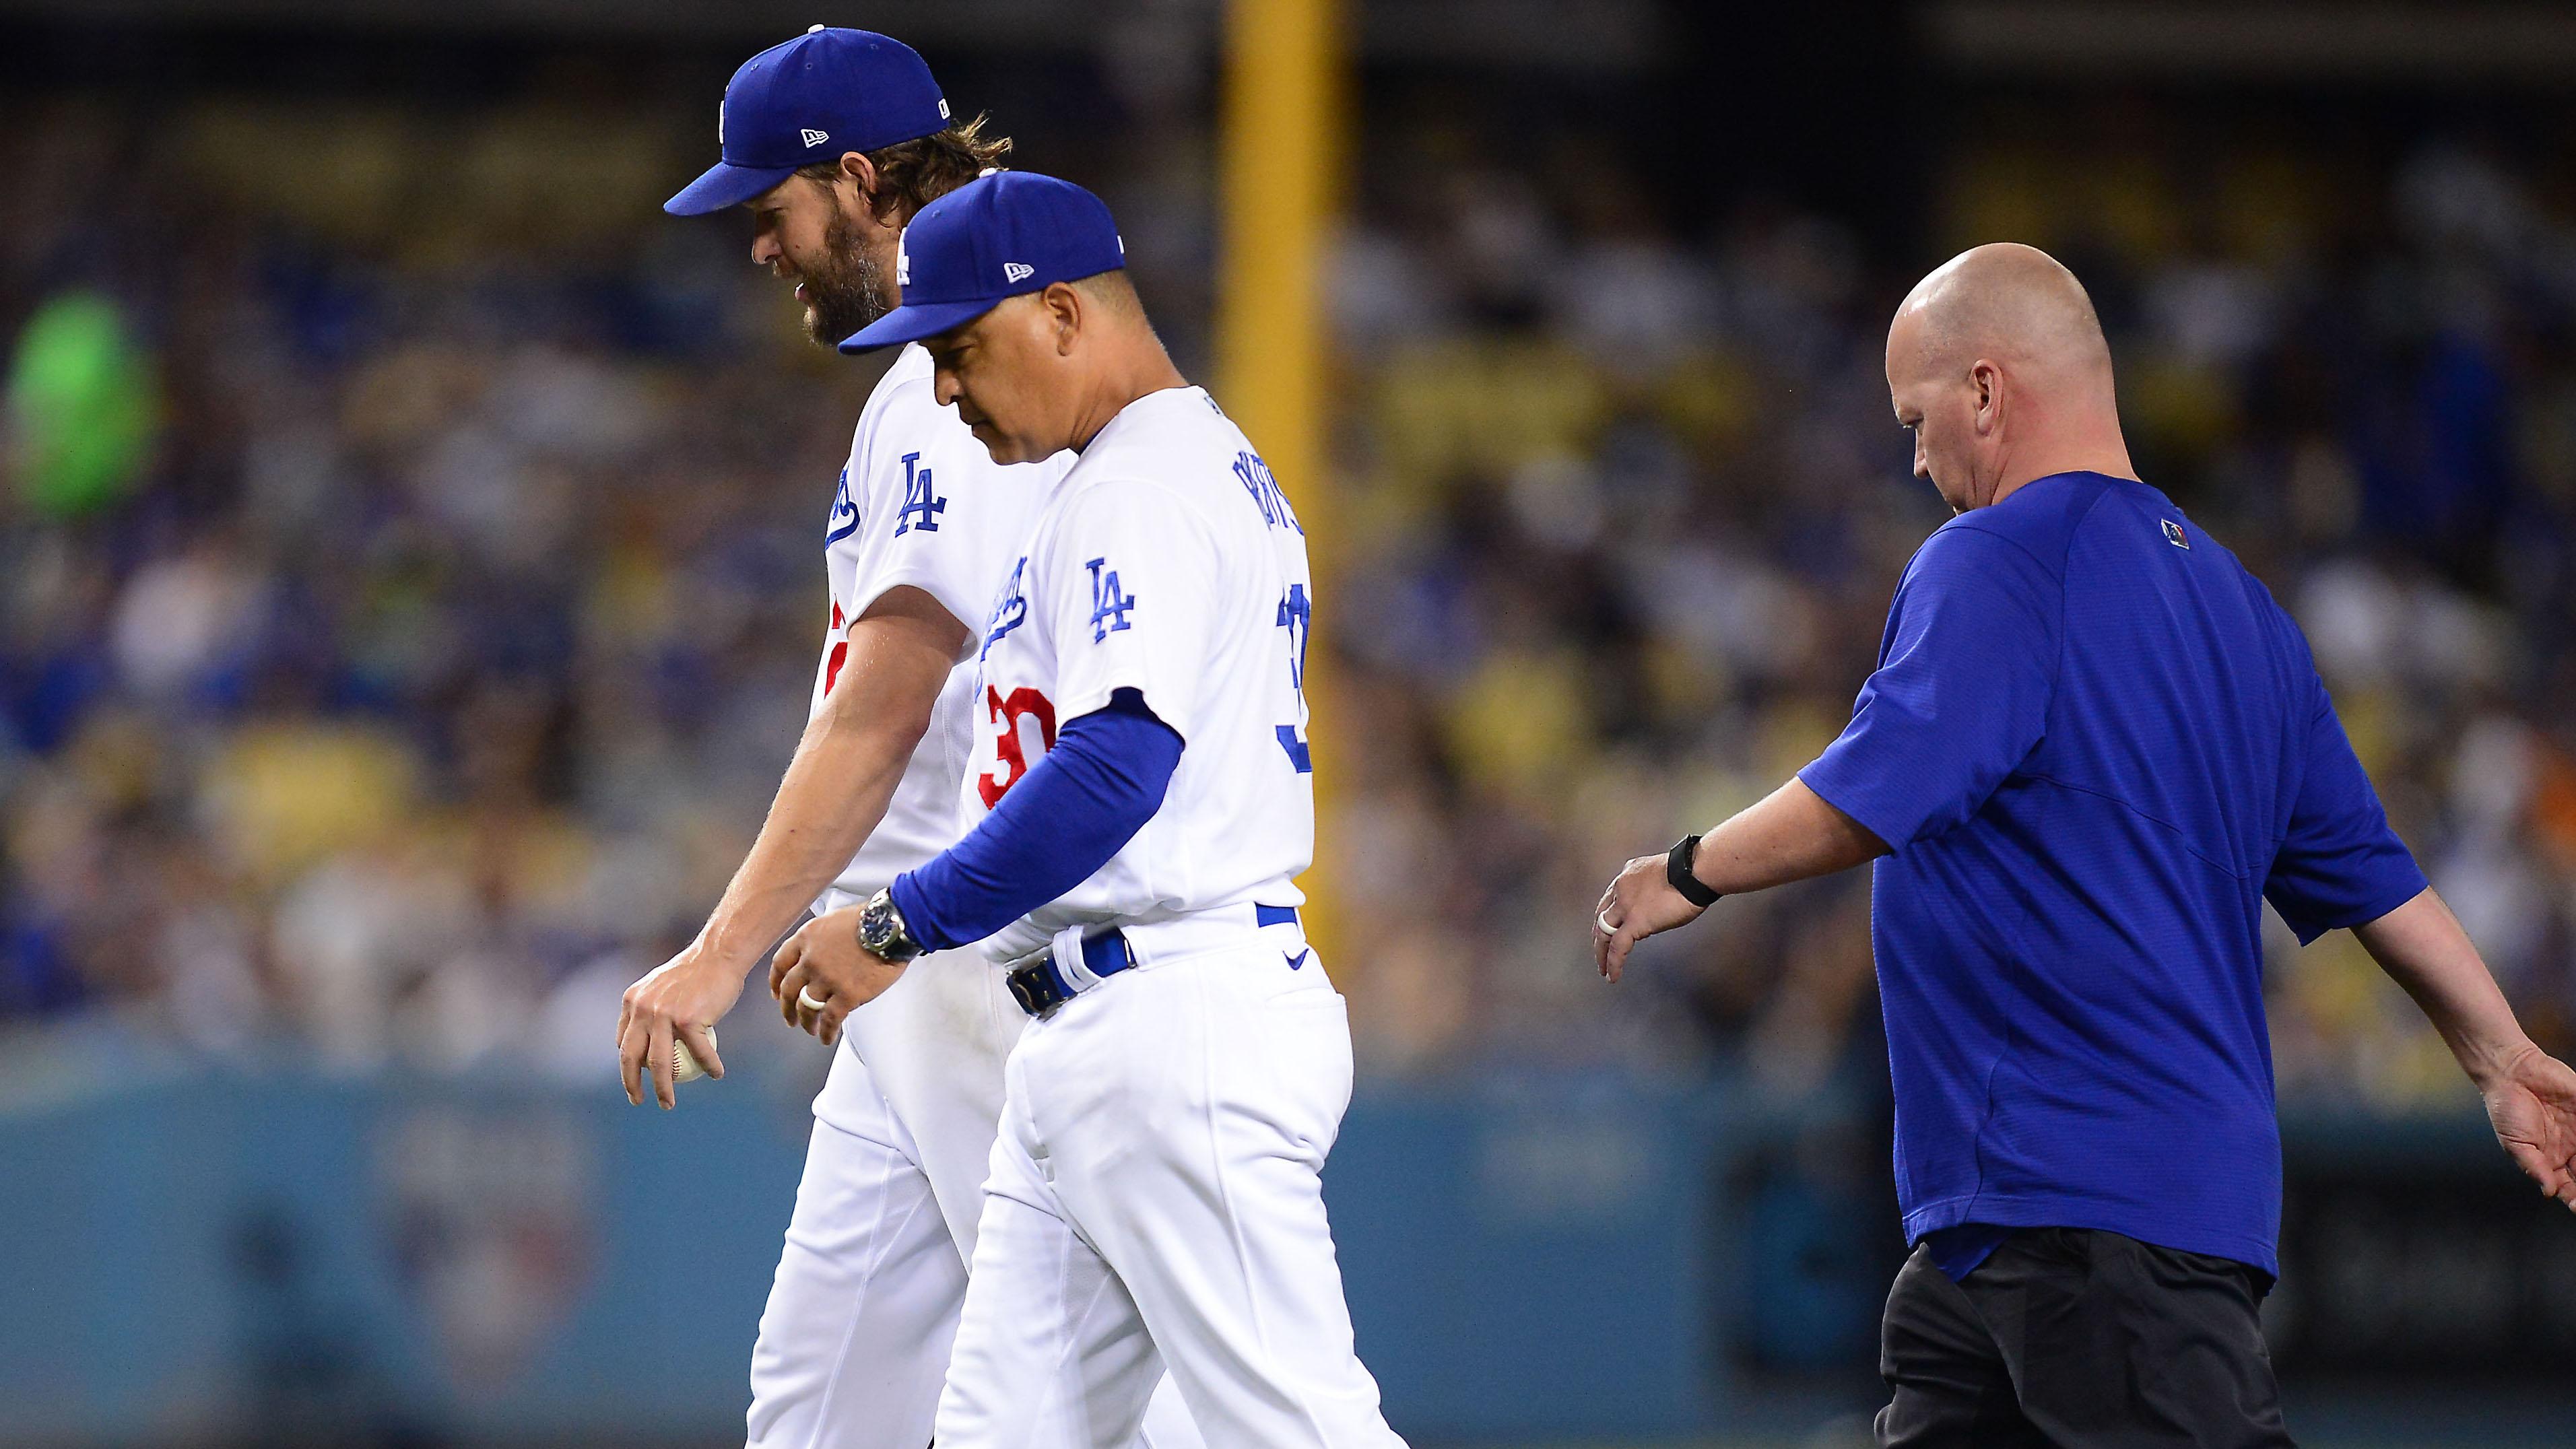 Los Angeles Dodgers starting pitcher Clayton Kershaw (22) leaves the game with manager Dave Roberts (30) and trainer Neil Rampe during the second inning against the Milwaukee Brewers at Dodger Stadium. / Gary A. Vasquez-USA TODAY Sports